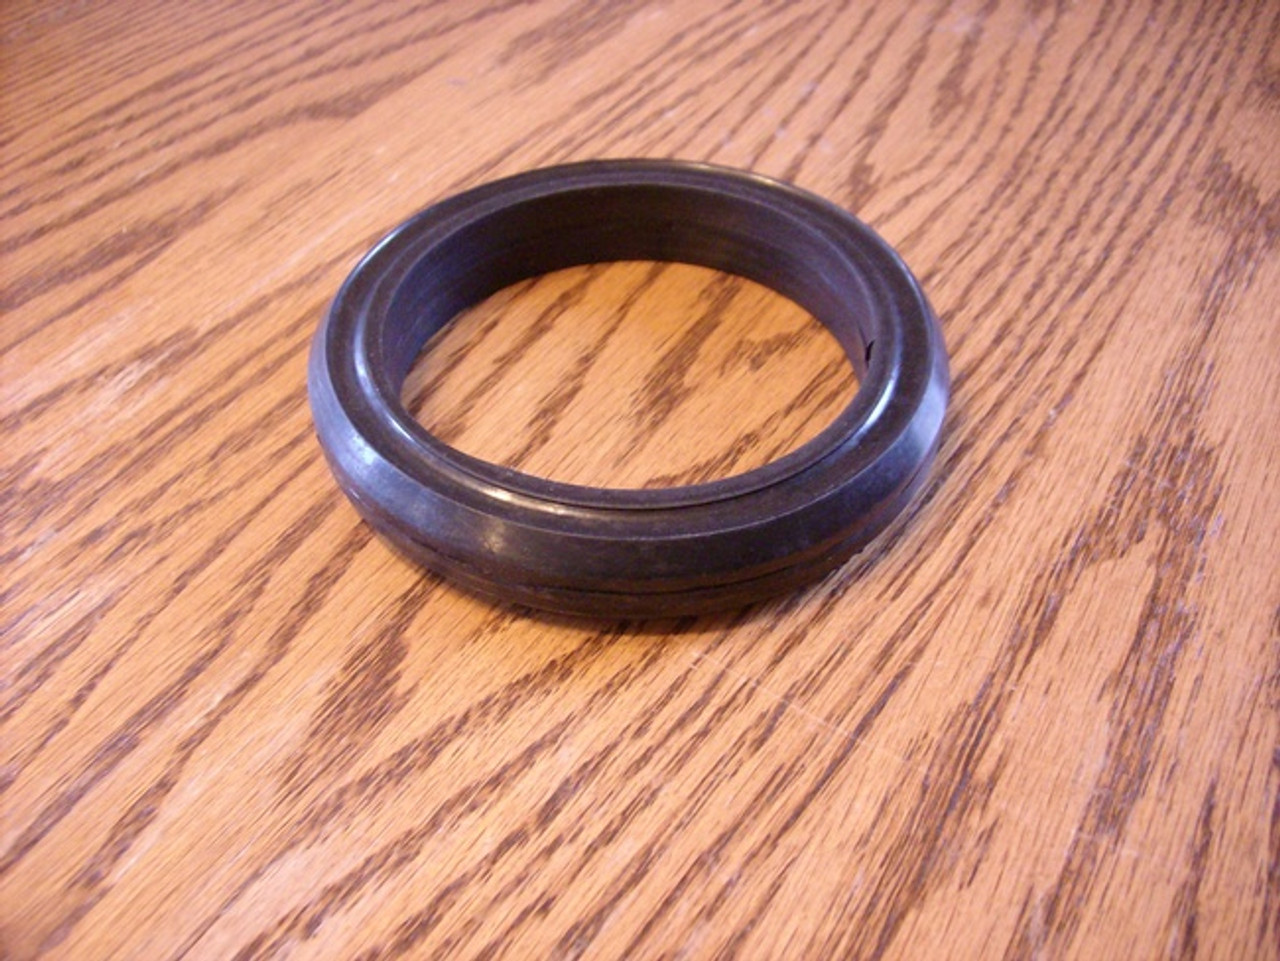 Drive Disc Ring for Snapper 10927, 23364, 7023364, 7023364YP, 704059, 1-0927, 2-3364 Snowblower and Lawn Mower